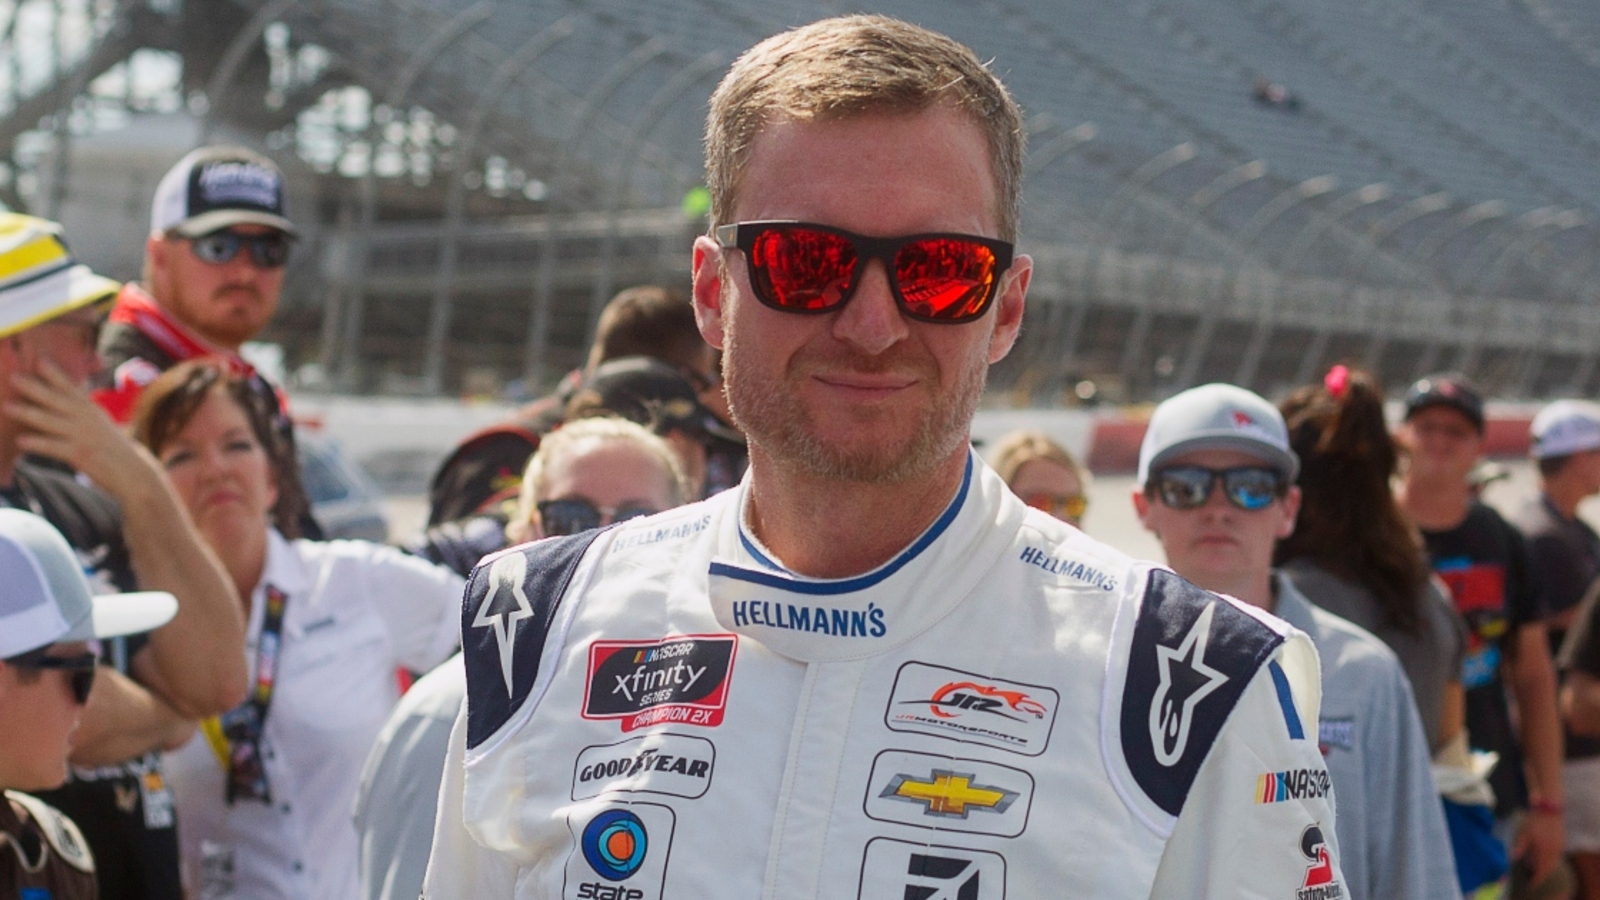 Dale Earnhardt Jr. fuels speculation of possible return with social media post